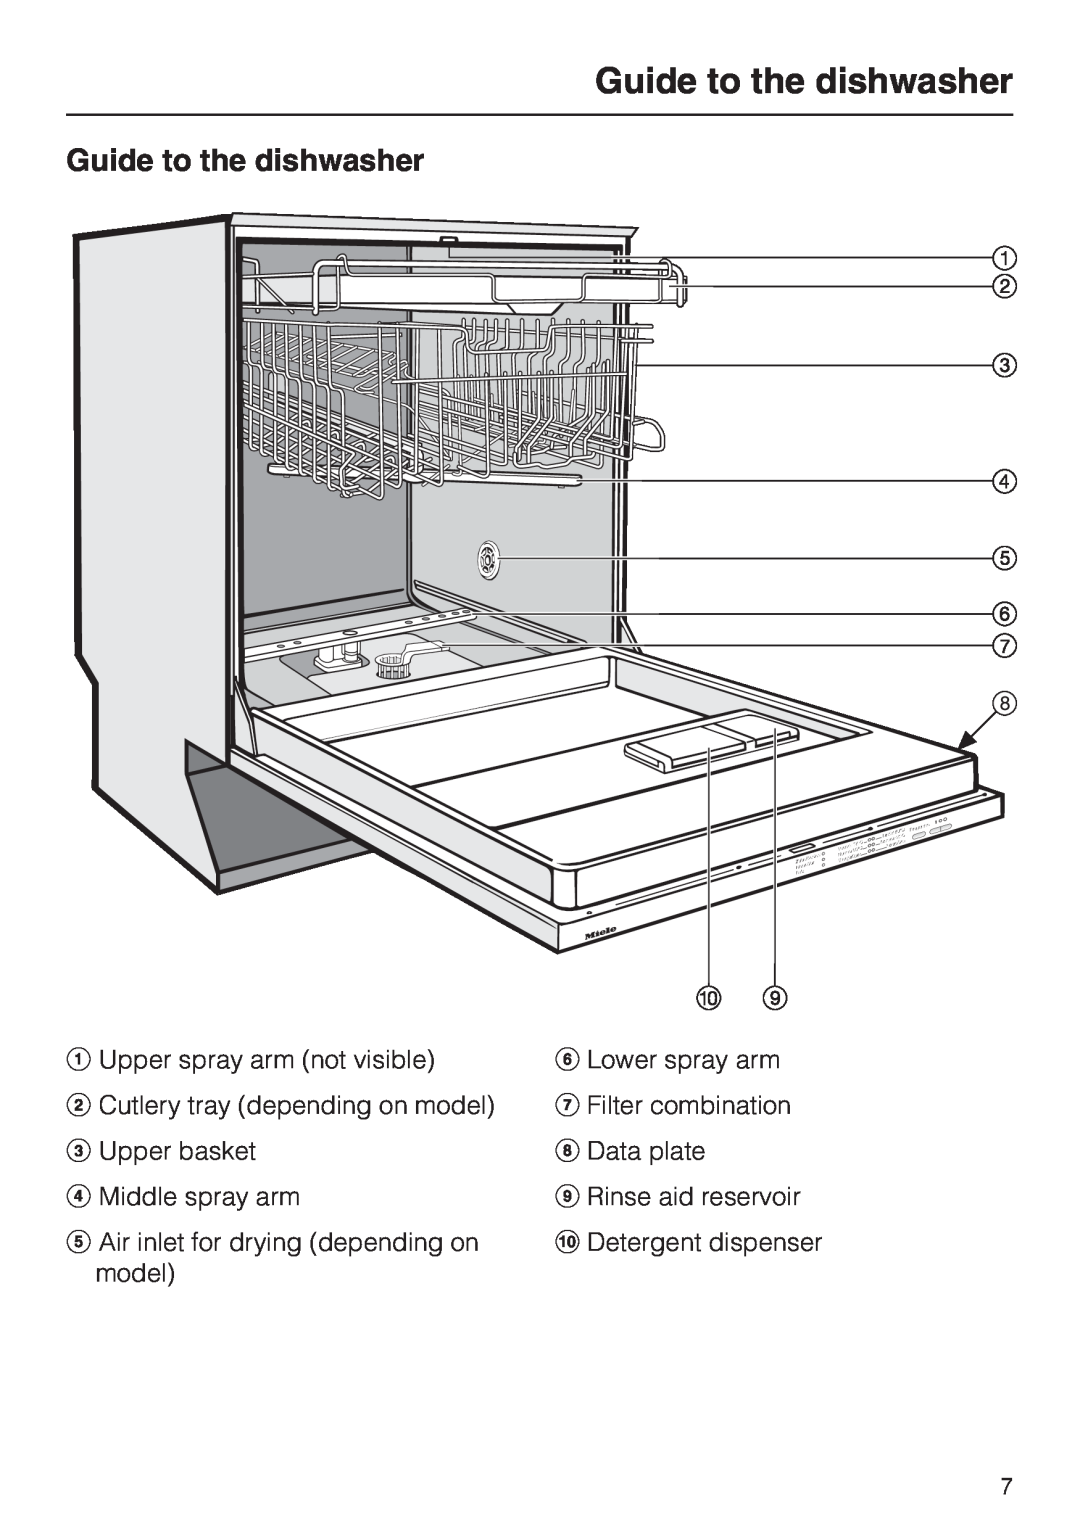 Miele G 2180, G 2170 operating instructions Guide to the dishwasher 